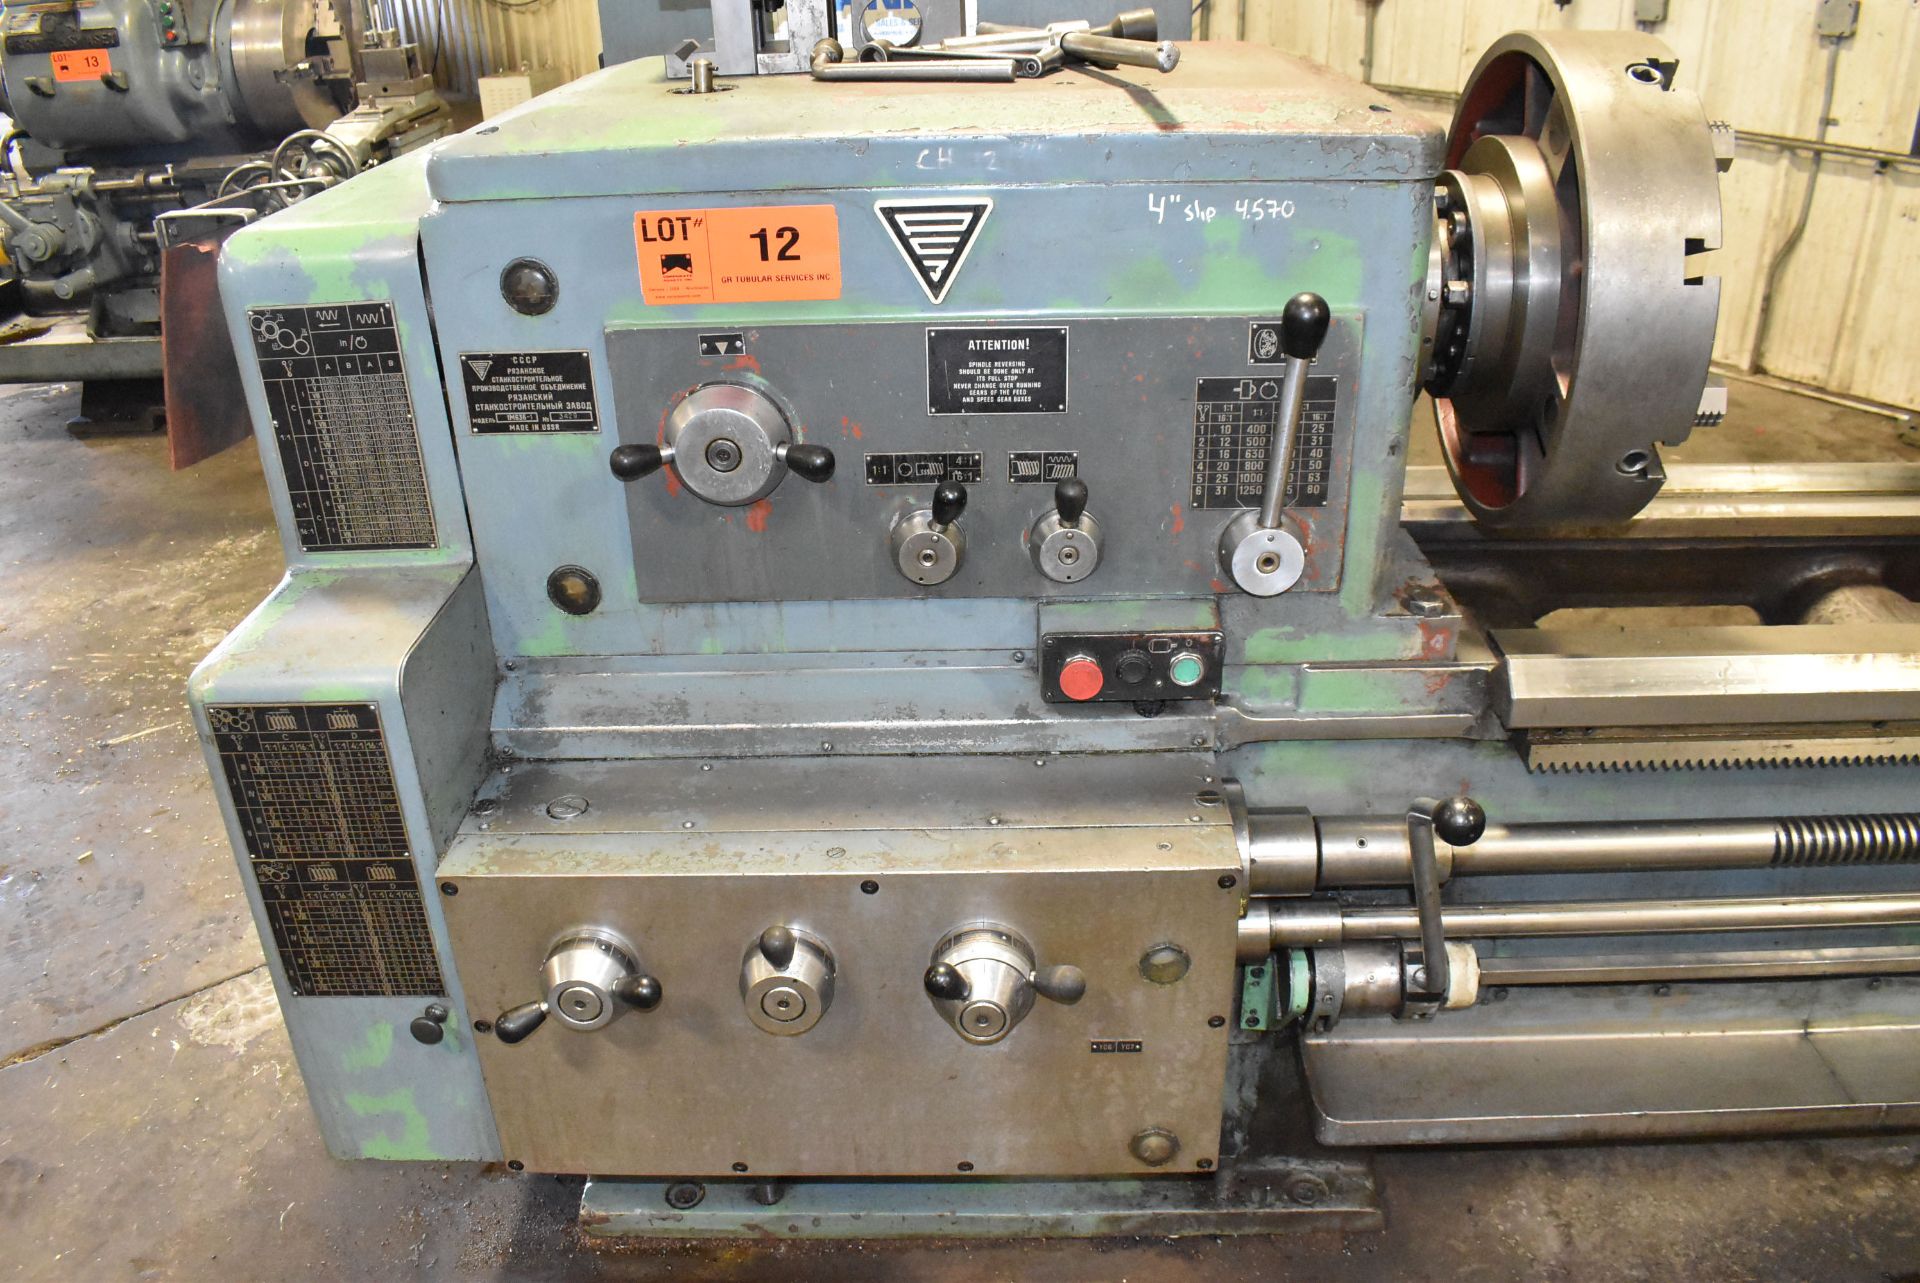 STANKO 1M63B-1 ENGINE LATHE WITH 30.5" SWING OVER BED, 62" DISTANCE BETWEEN CENTERS, 3.25" SPINDLE - Image 4 of 10